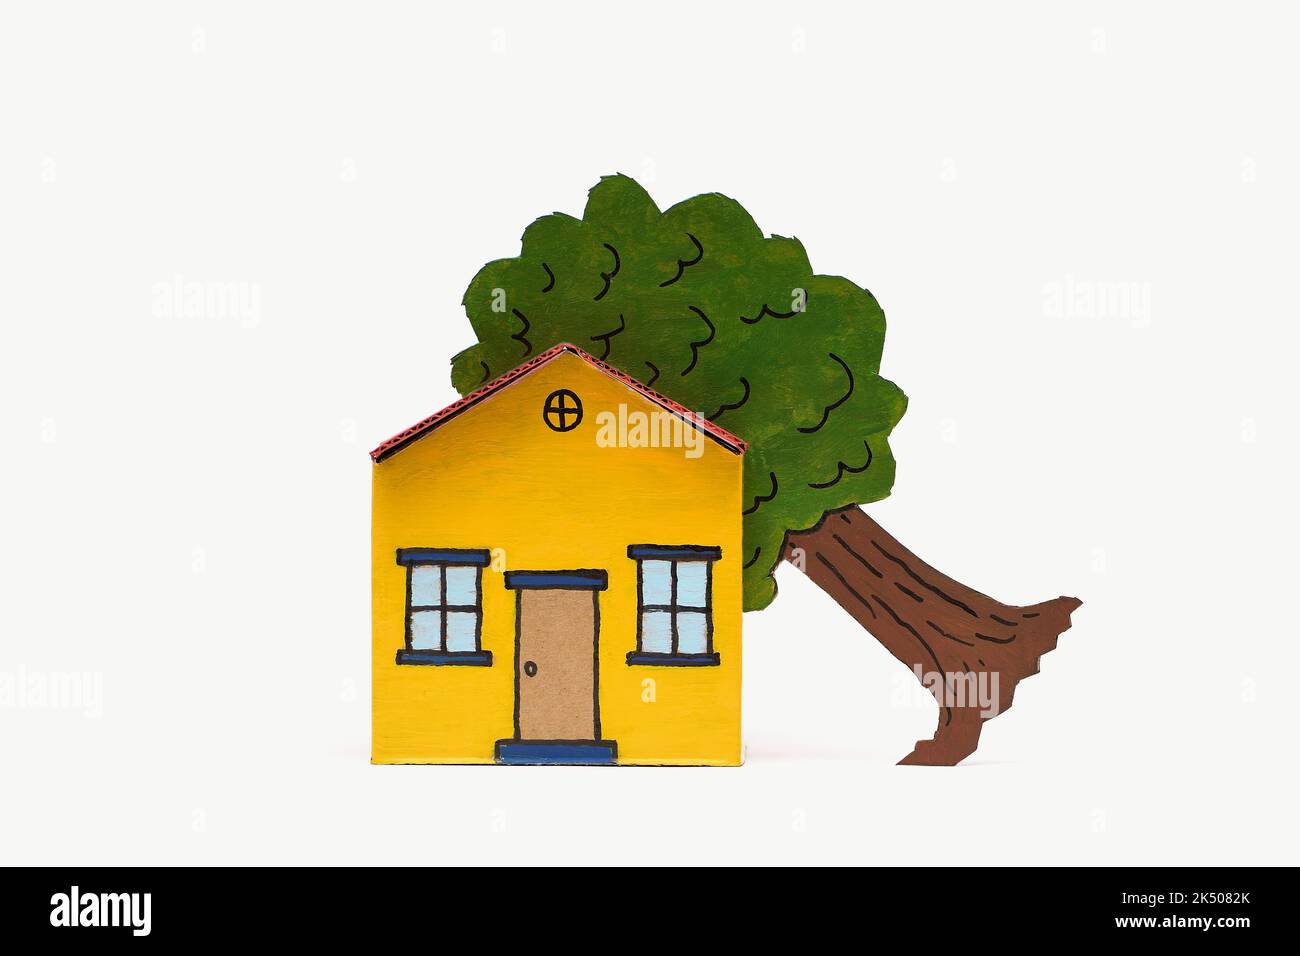 A yellow and red toy cardboard house with a tree in its roof in the middle of frame isolated on a white background, captured in a studio Stock Photo